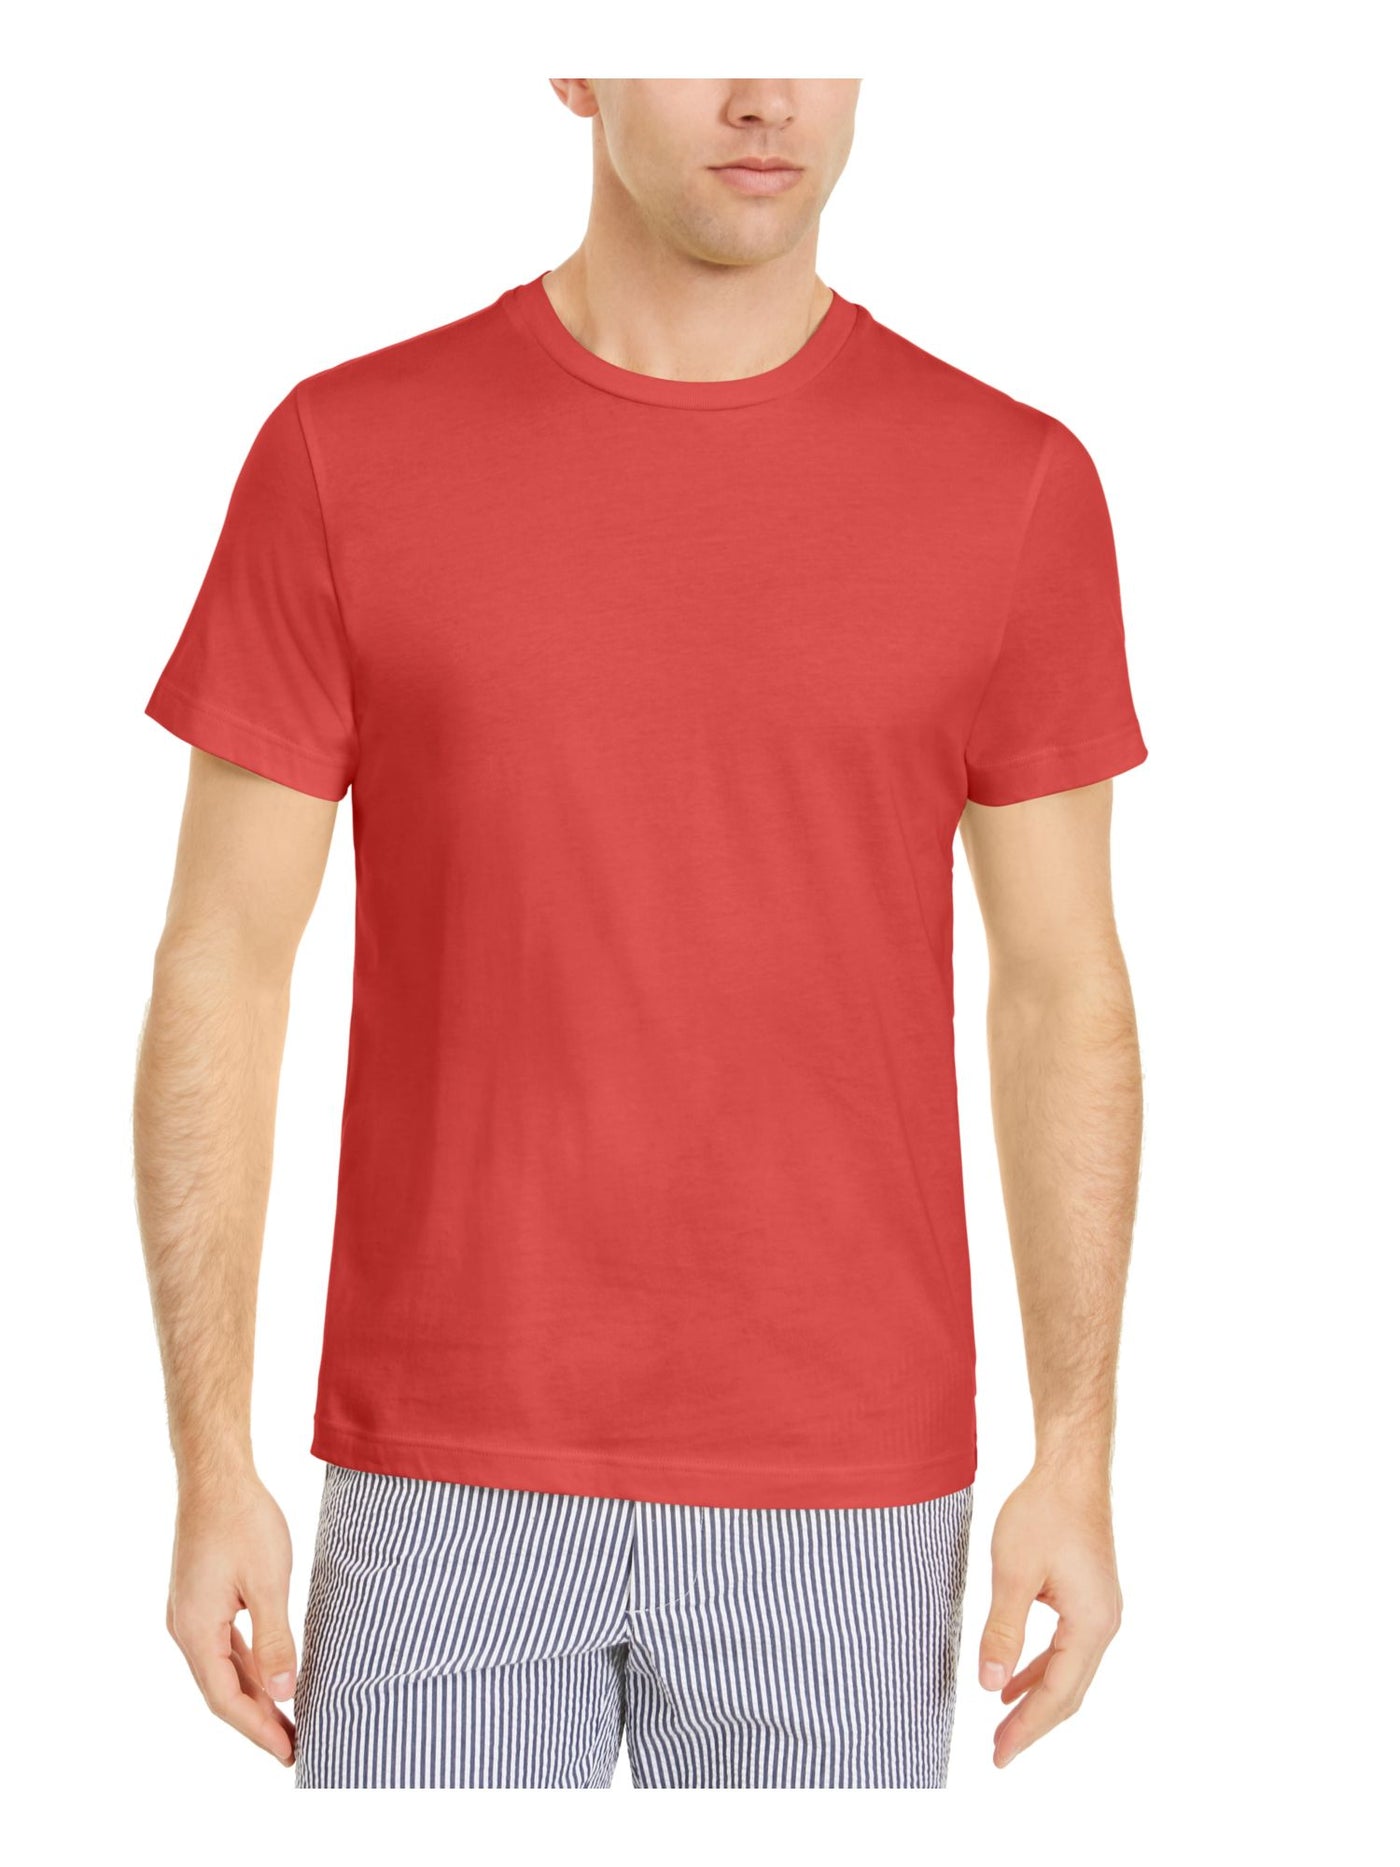 CLUBROOM Mens Coral Lightweight, Classic Fit Moisture Wicking T-Shirt S